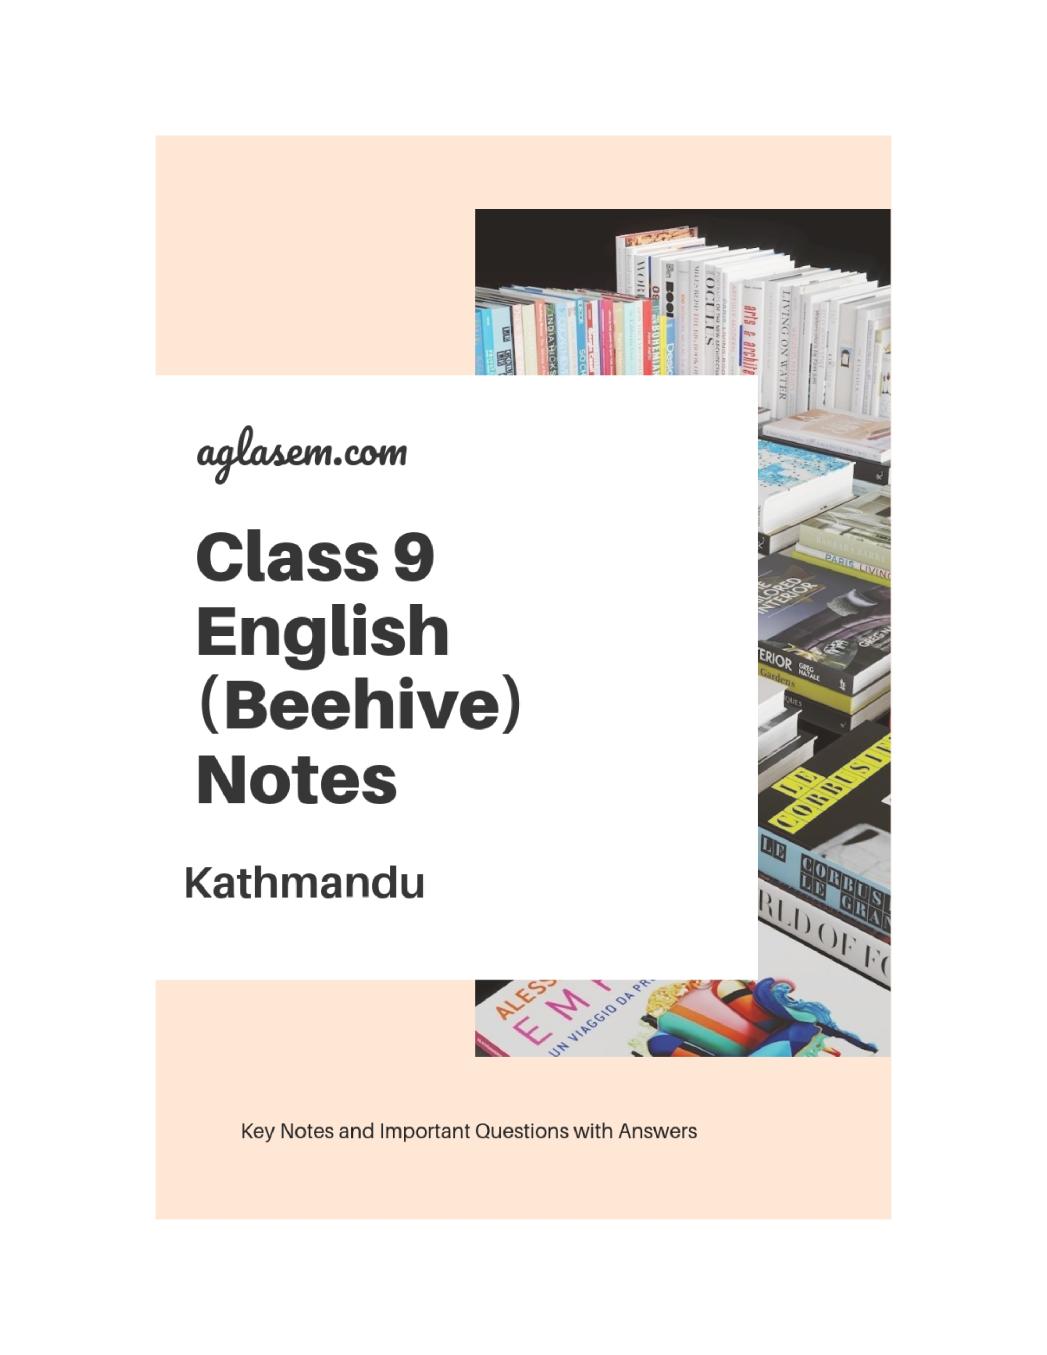 Class 9 English Beehive Notes For Kathmandu - Page 1